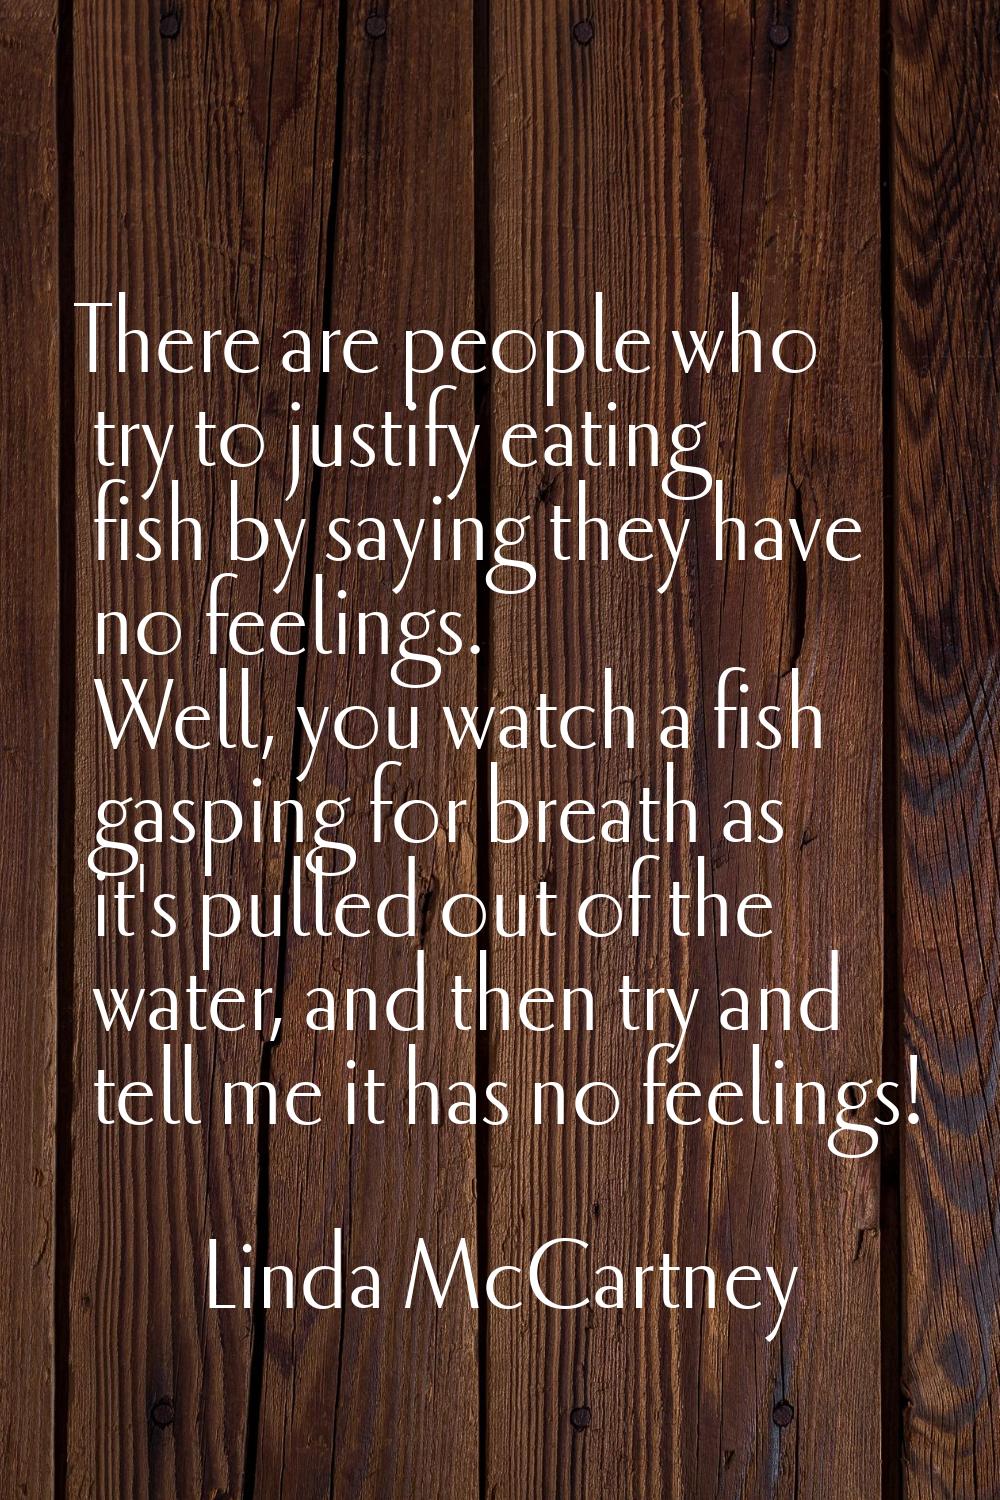 There are people who try to justify eating fish by saying they have no feelings. Well, you watch a 